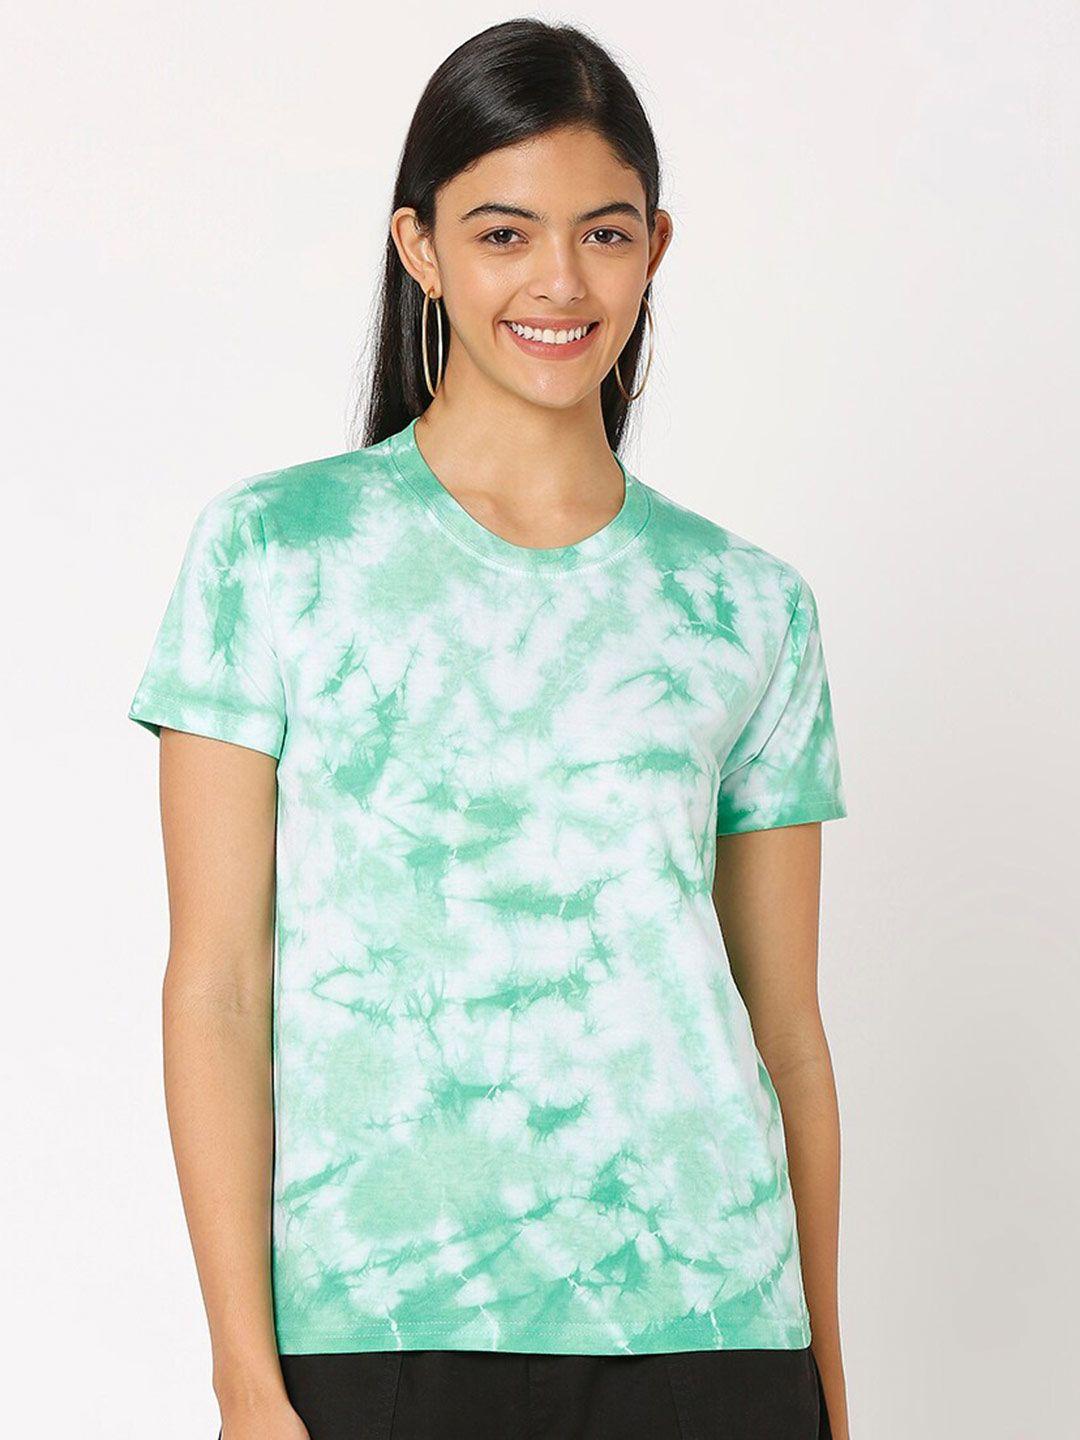 smarty-pants-women-coral-green-&-white-tie-and-dye-dyed-t-shirt